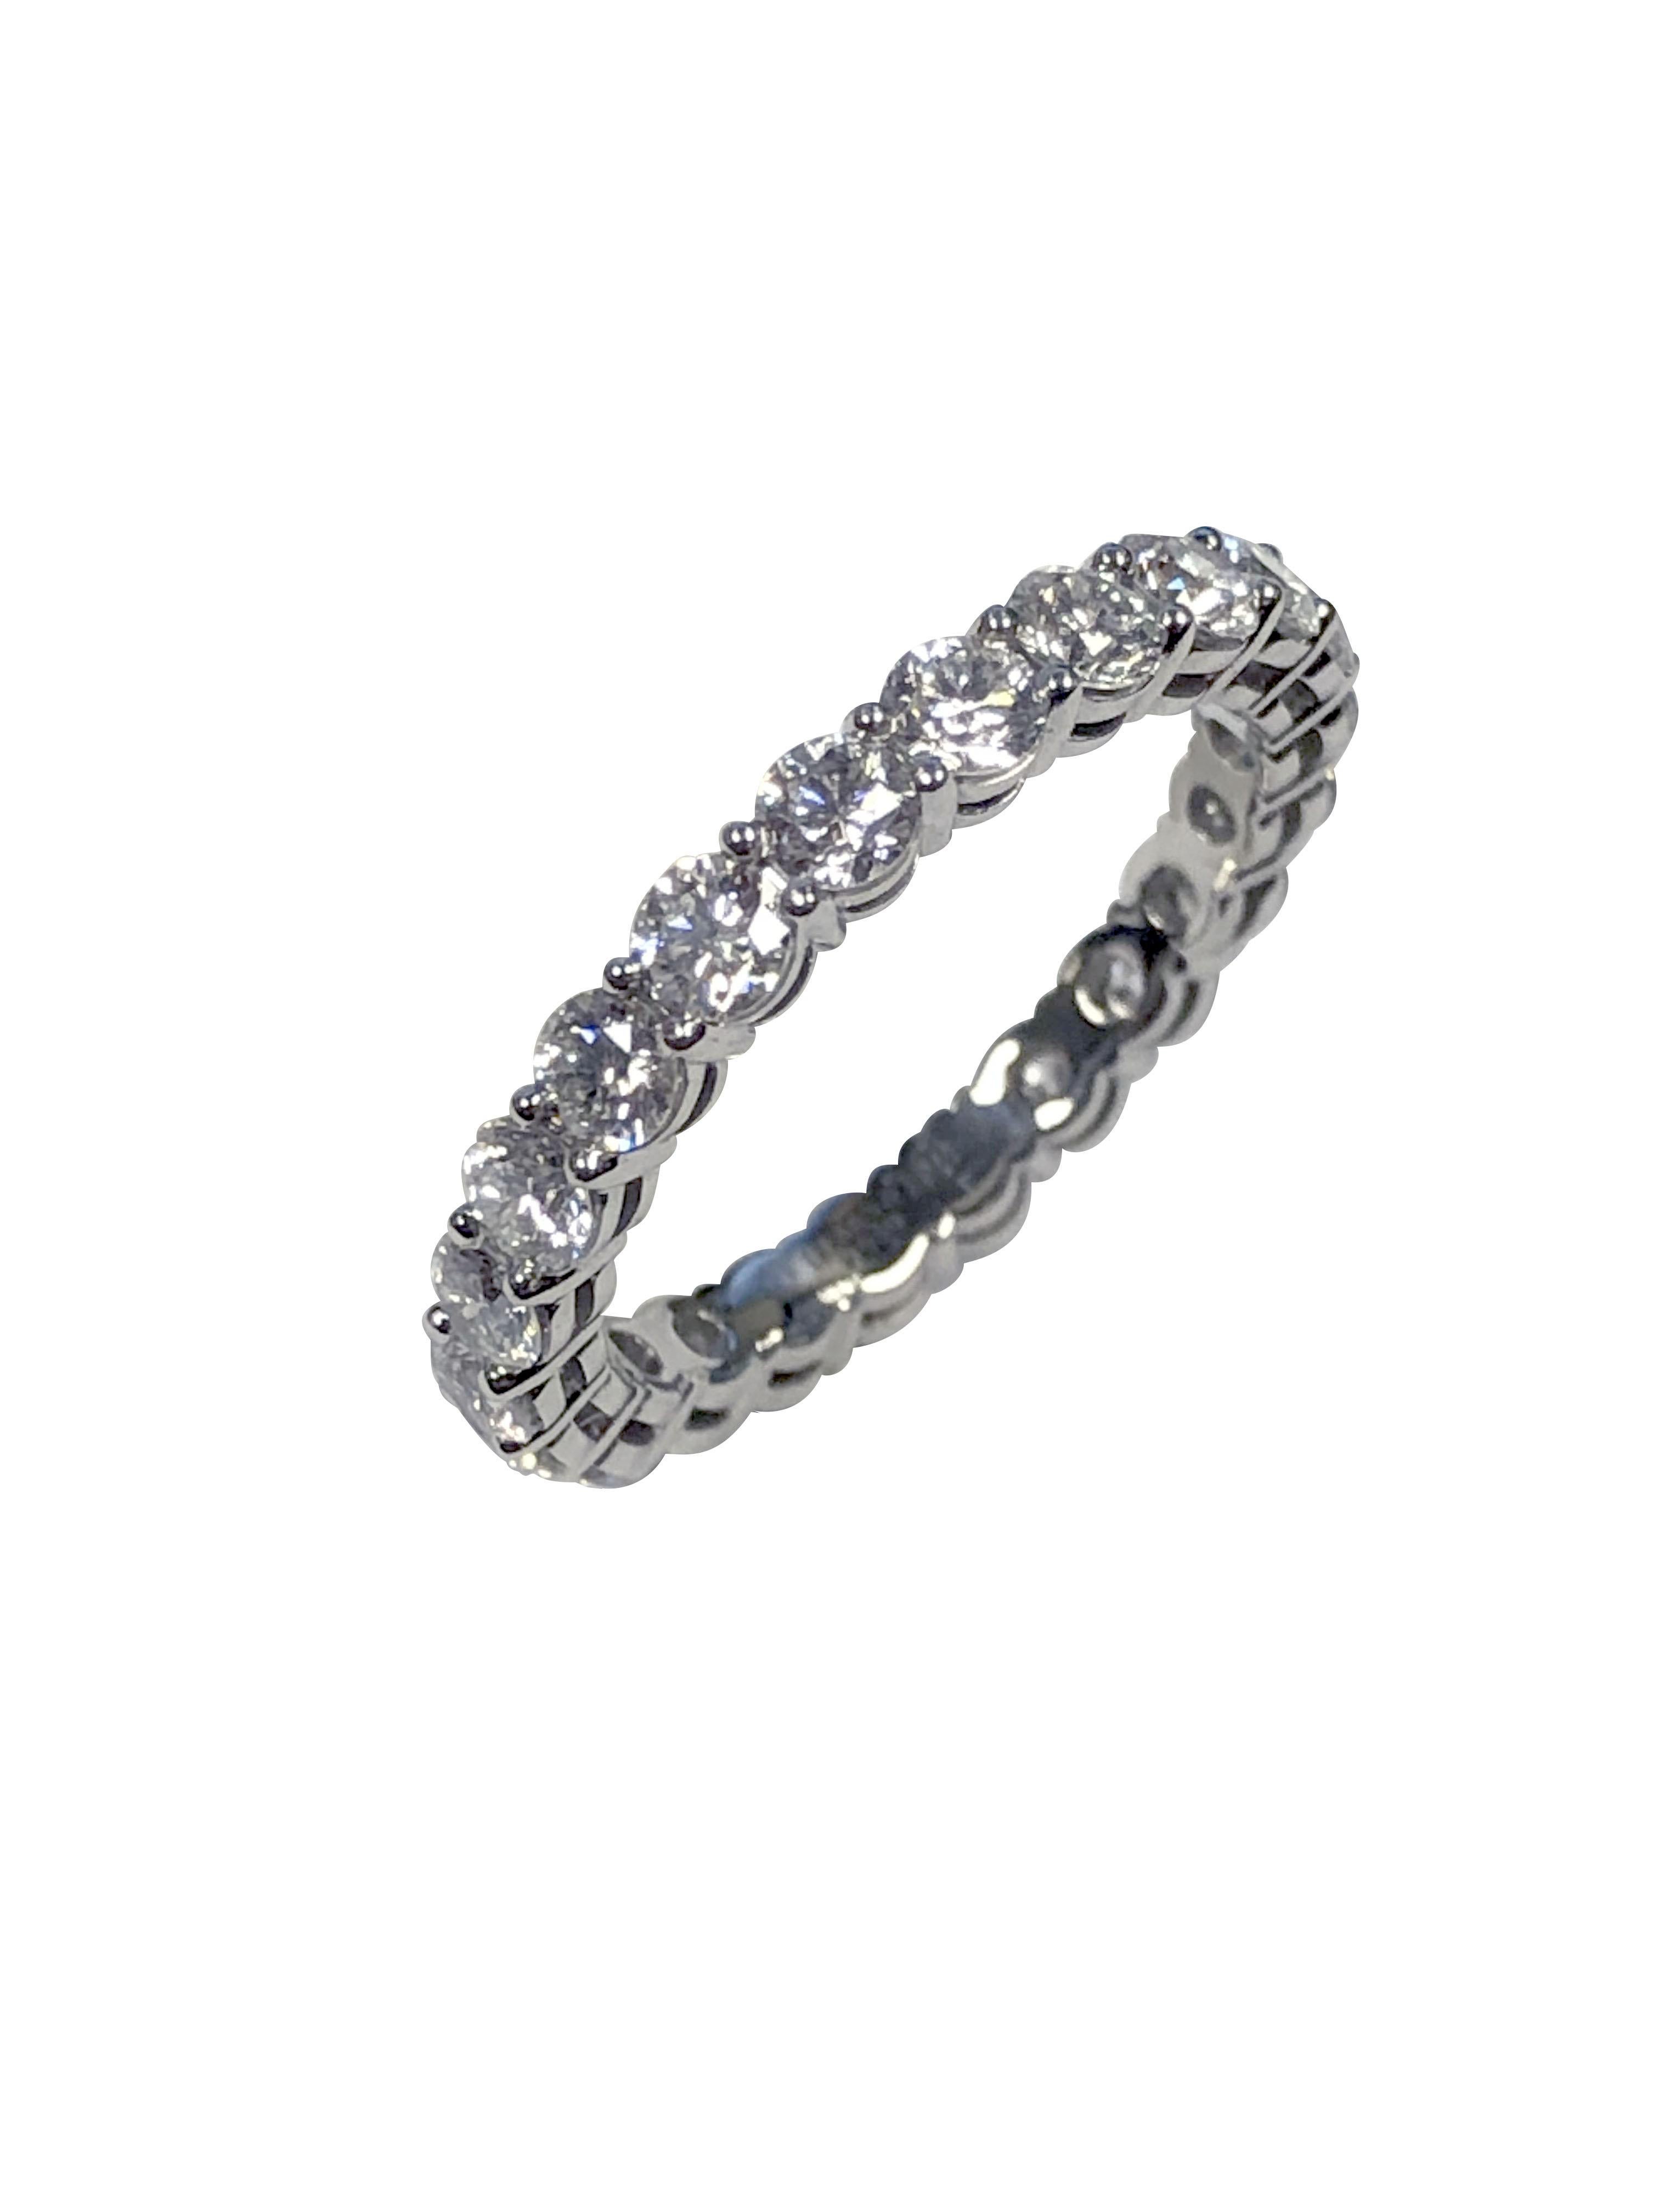 Round Cut Tiffany & Company Forever collection Platinum and Diamond Eternity Band Ring